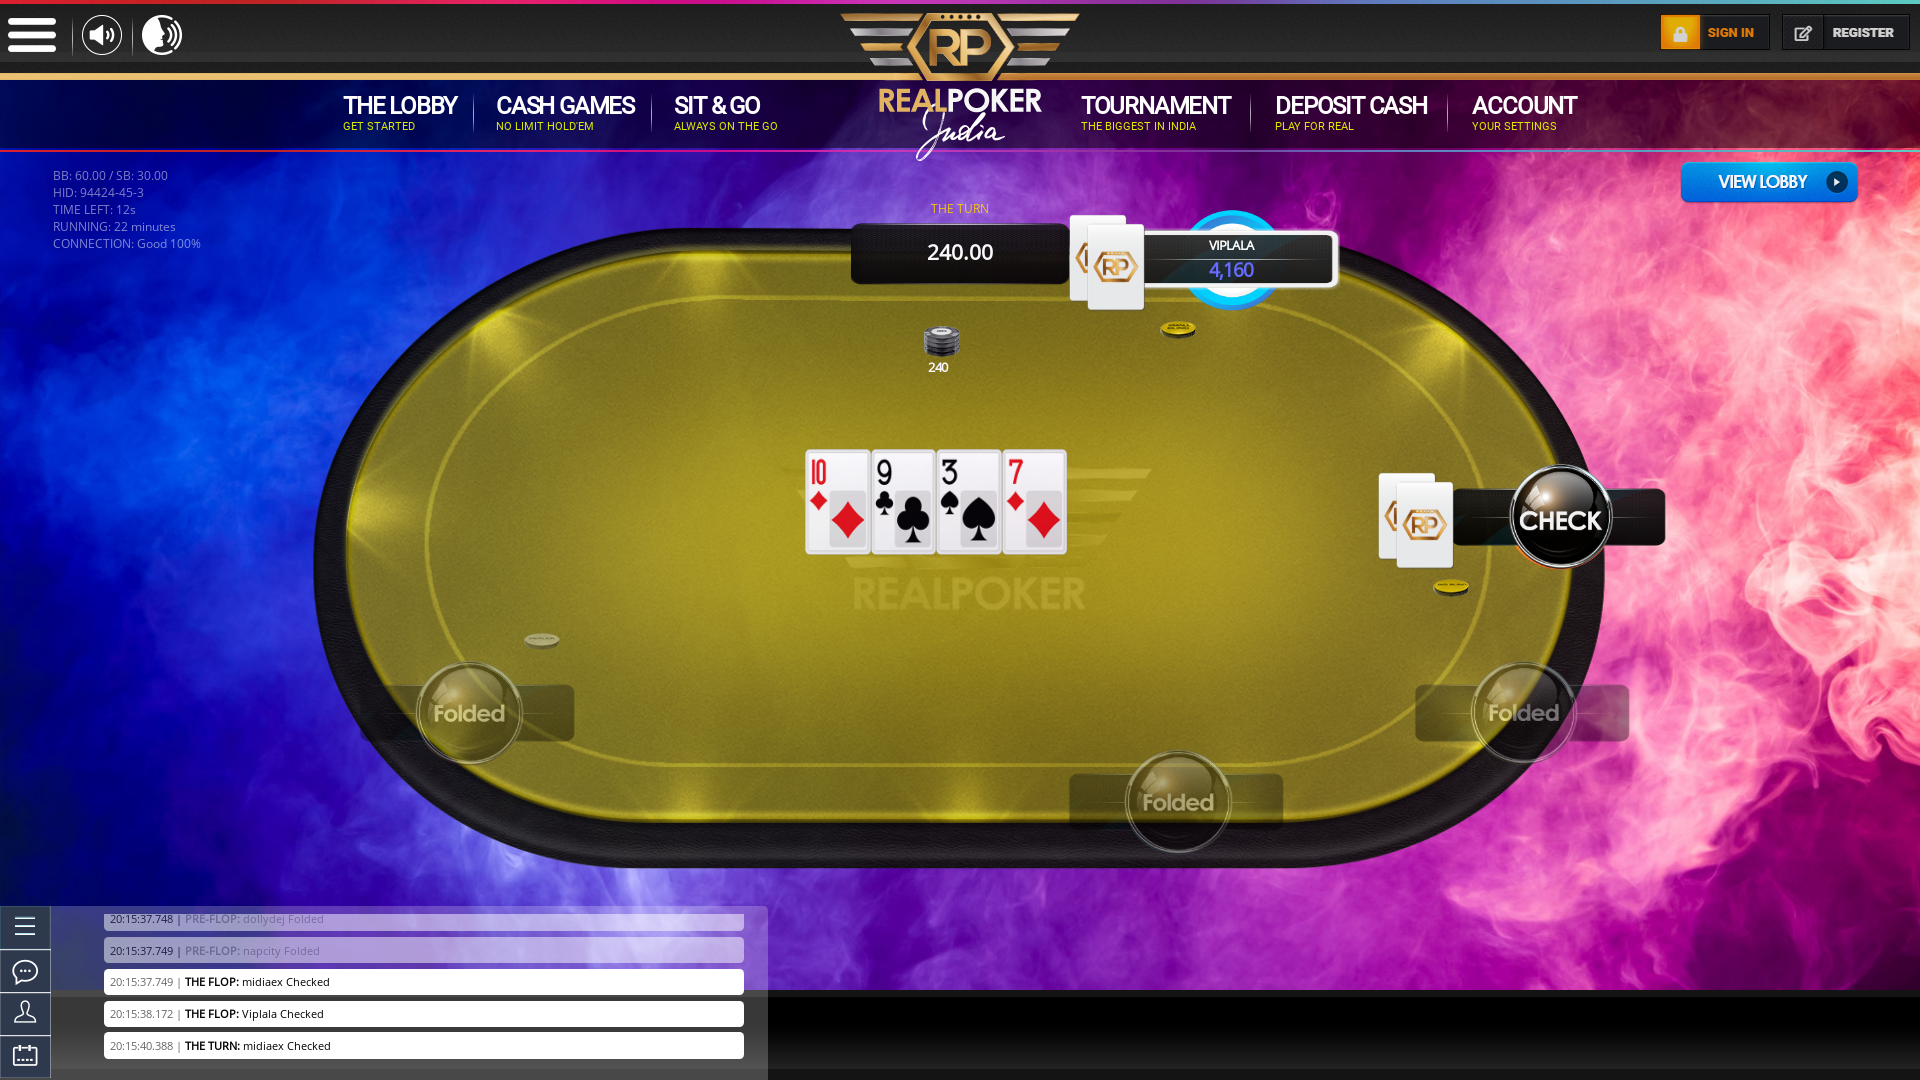 Real poker 10 player table in the 22nd minute of the match